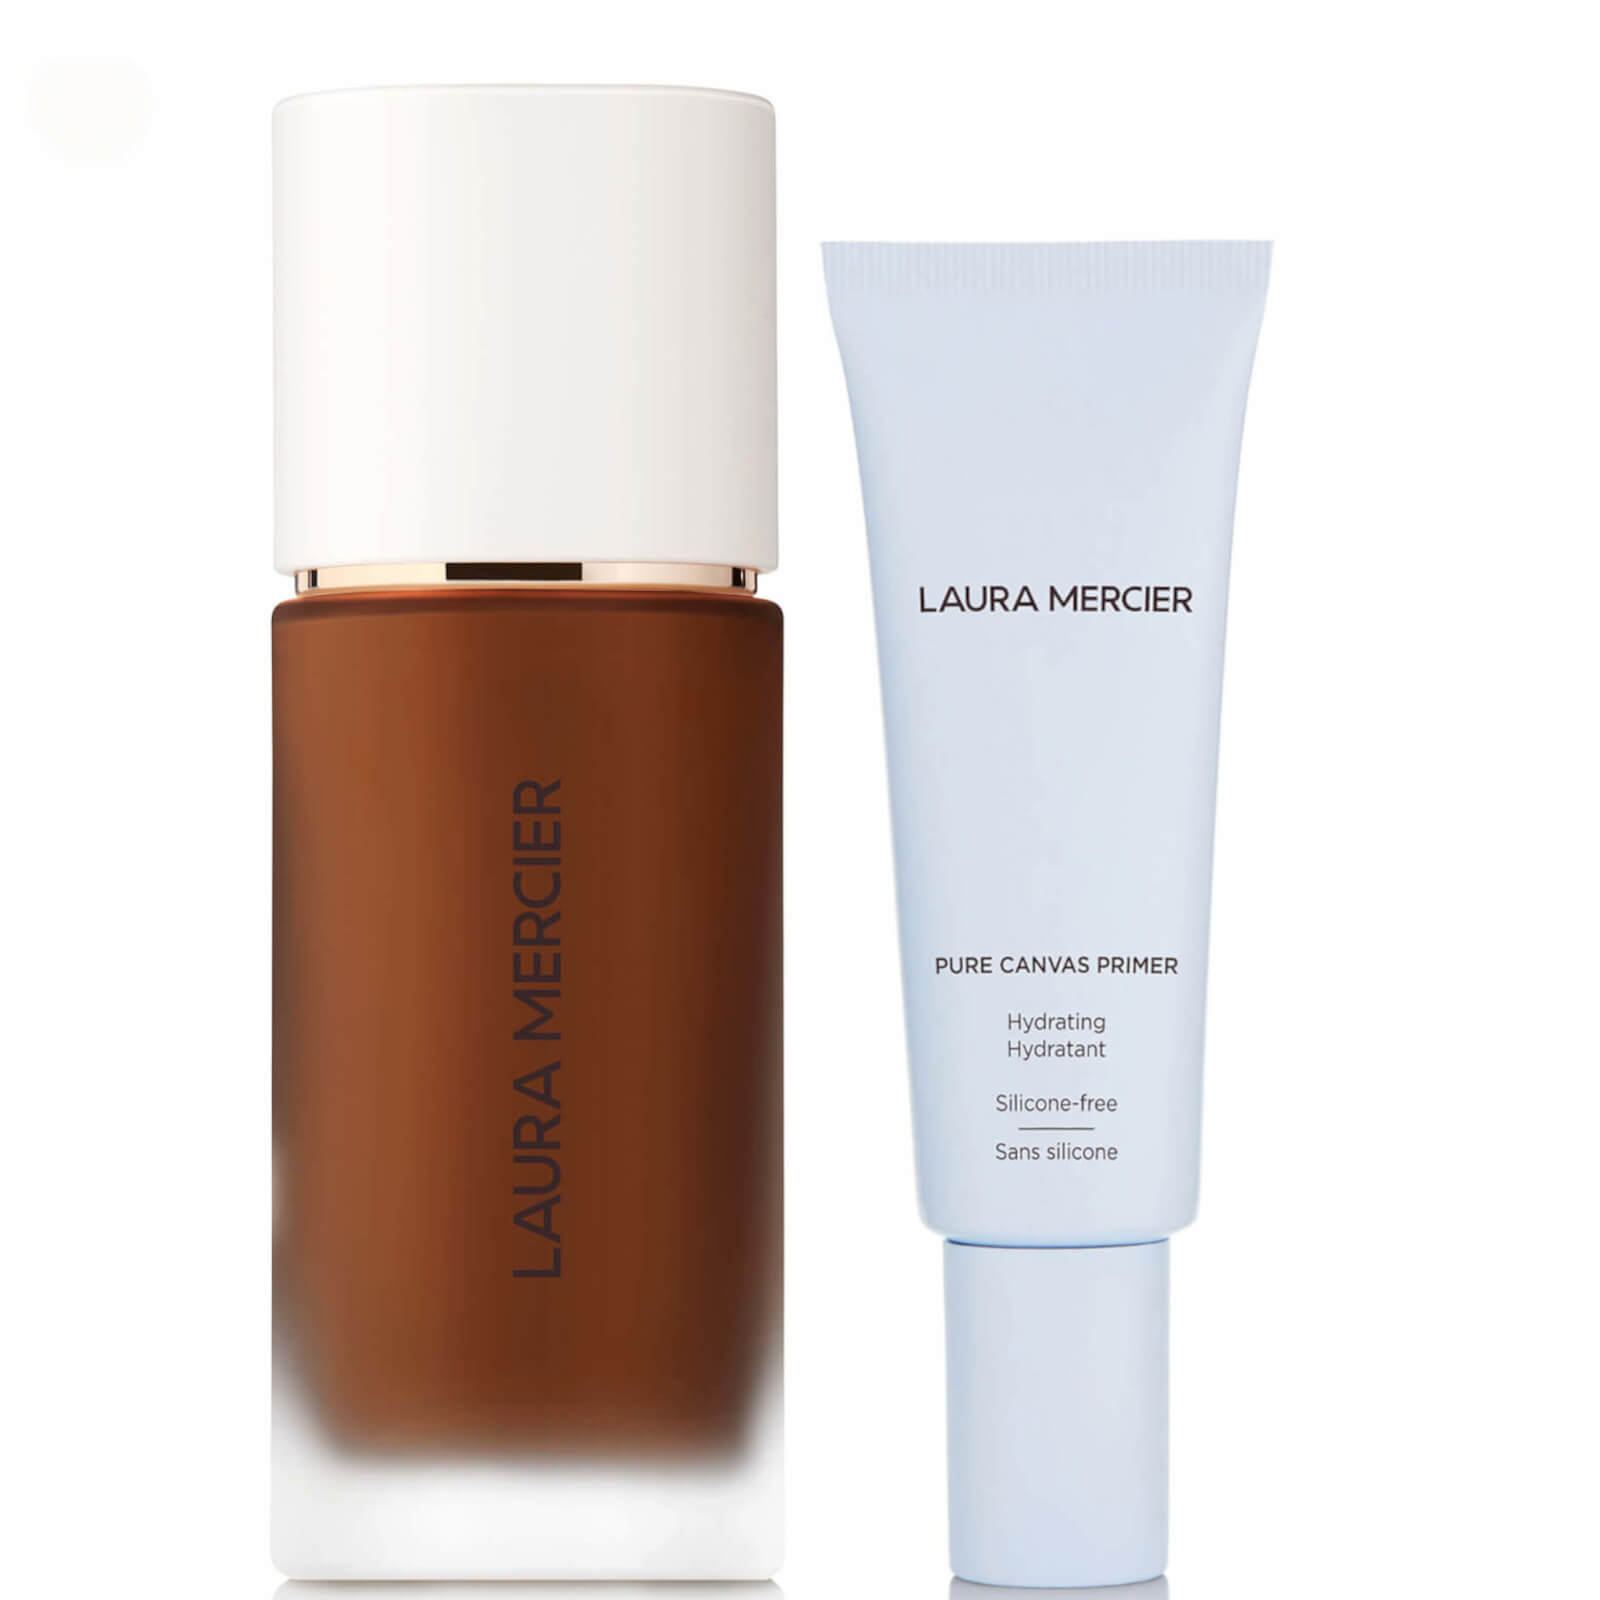 Laura Mercier Real Flawless Foundation and Pure Canvas Hydrating Primer Bundle (Various Shades) - 6N